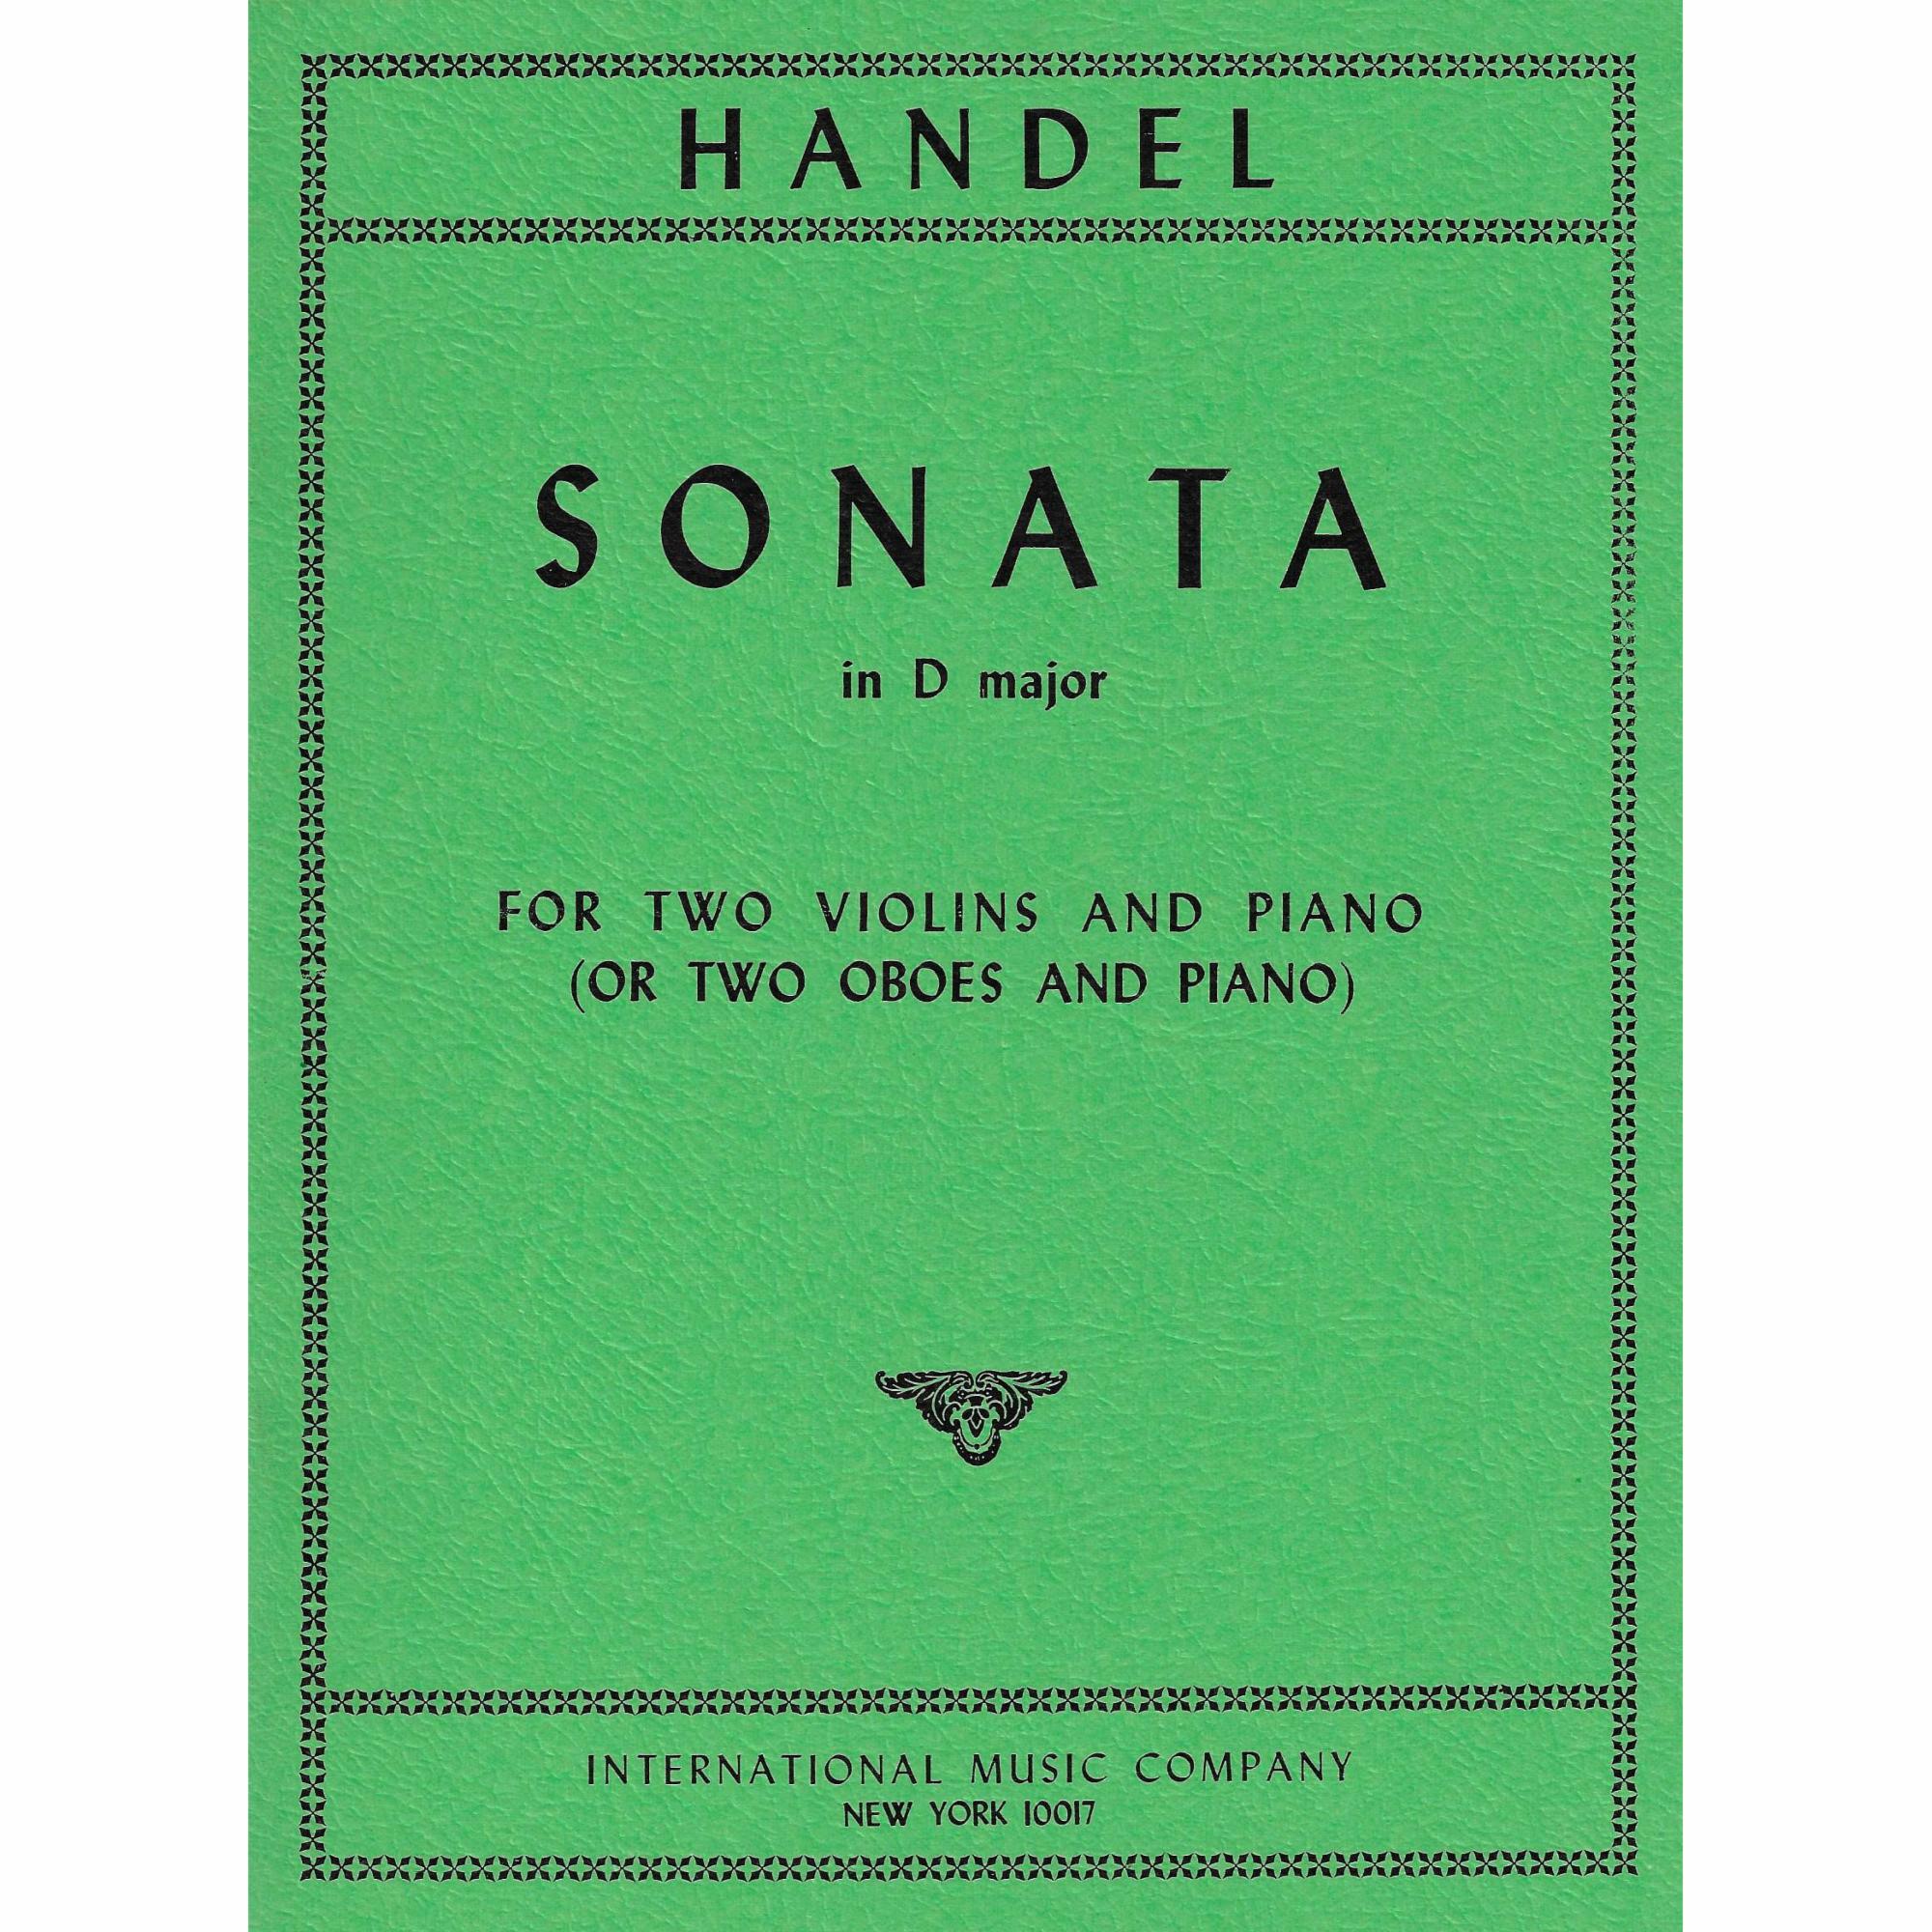 Handel -- Sonata in D Major for Two Violins and Piano